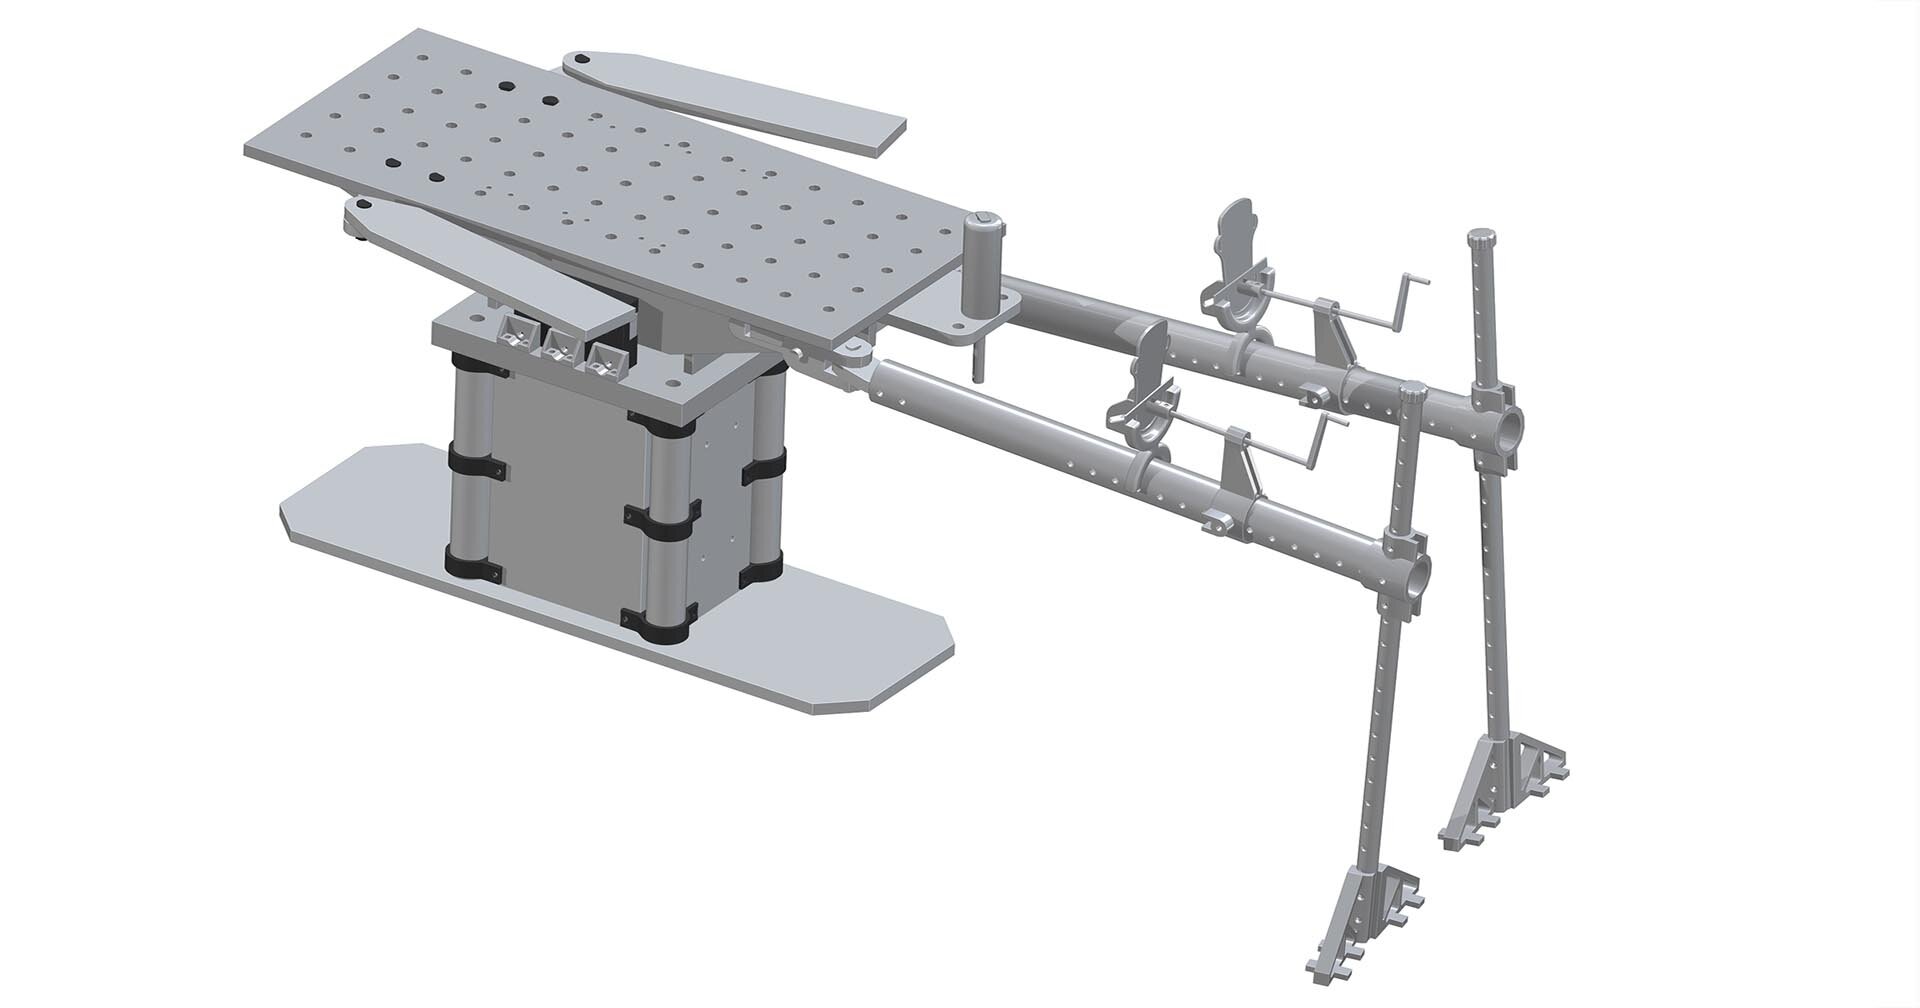 Open source technology enables 3D printed operating tables